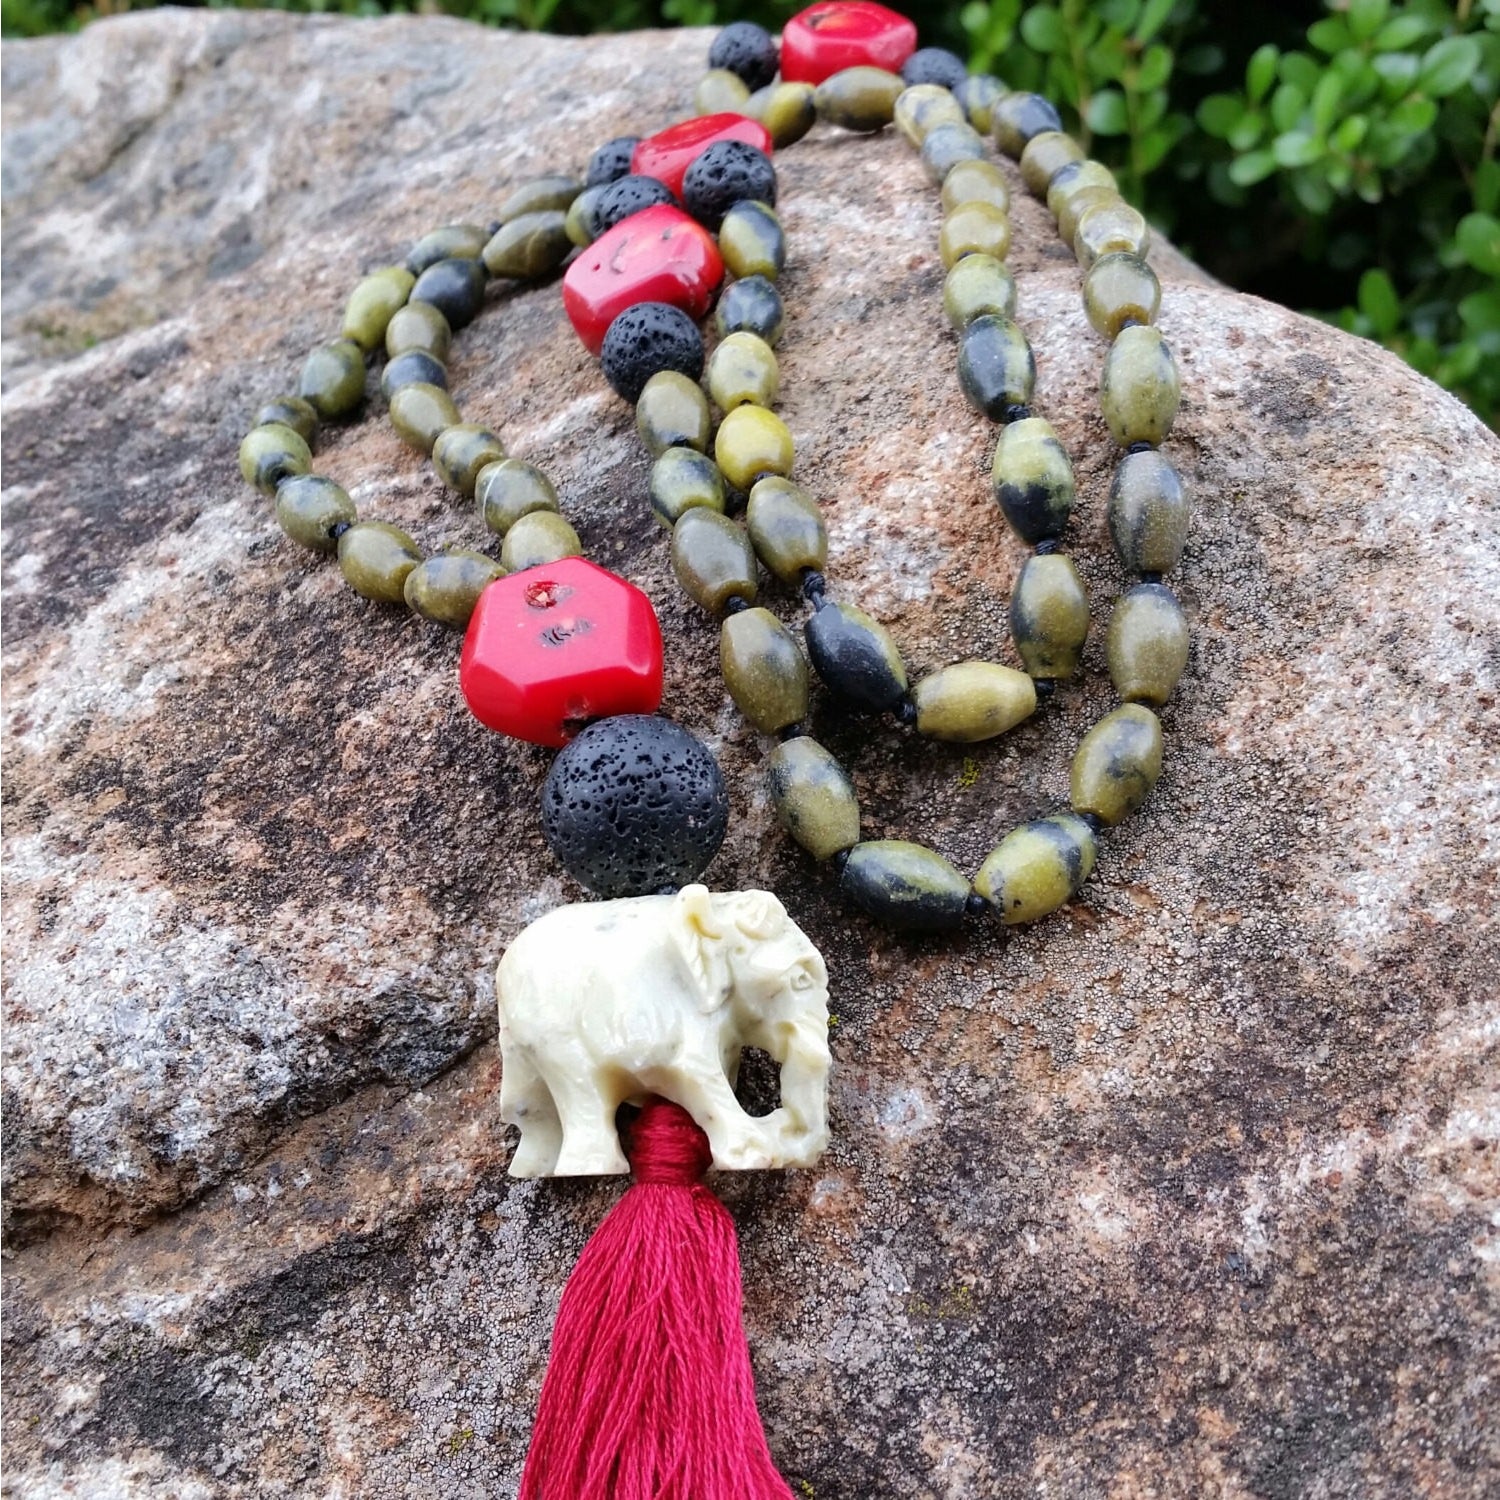 Essential oil diffuser necklace - knotted yellow turquoise, red coral - mala - elephant amulet and tassle